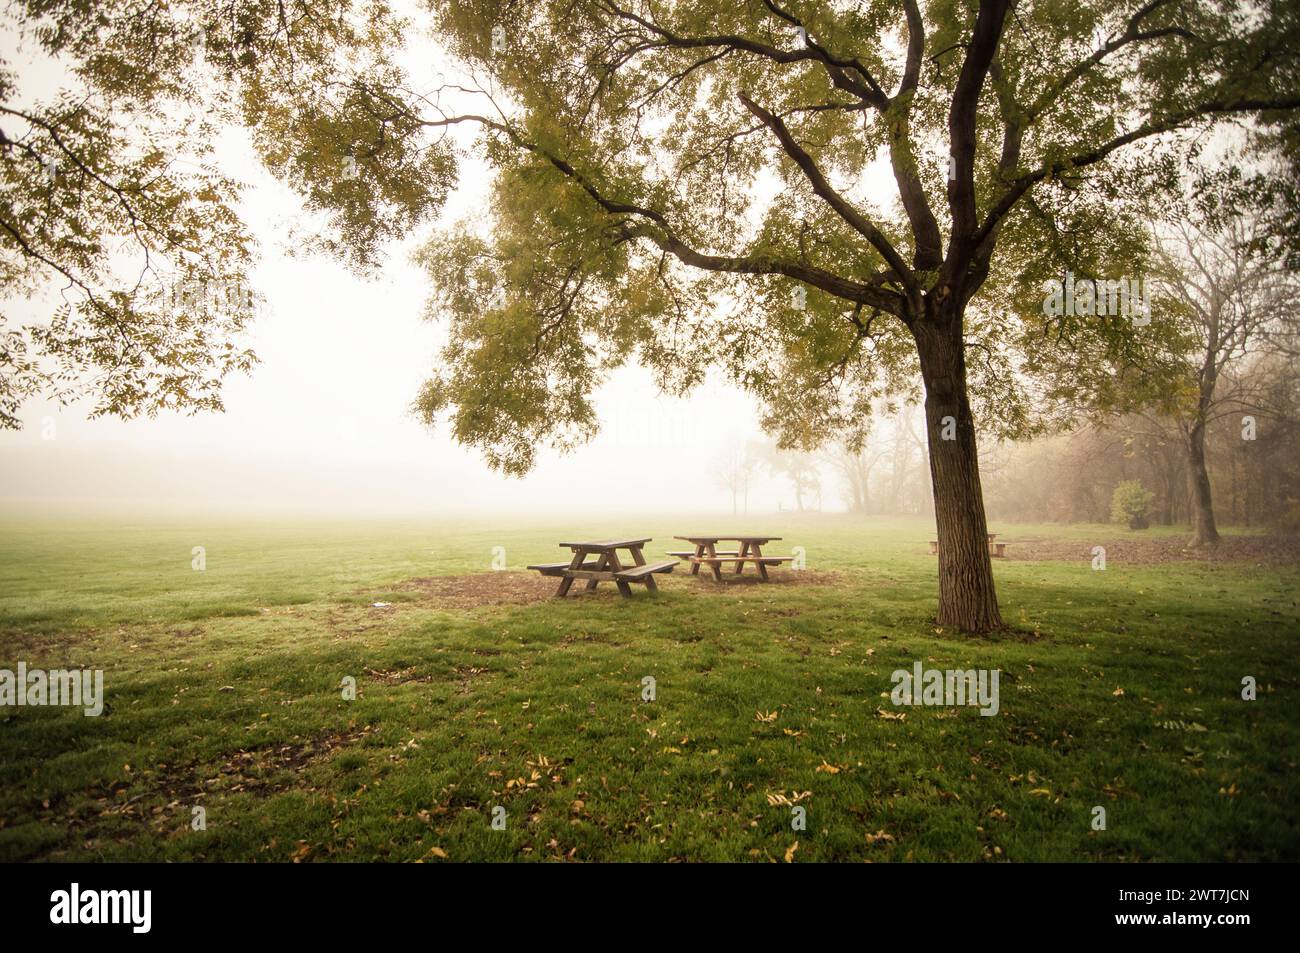 A Foggy Morning in the Park. Two picnic trees under a big tree near a glade. Field covered in fog in the background. Stock Photo